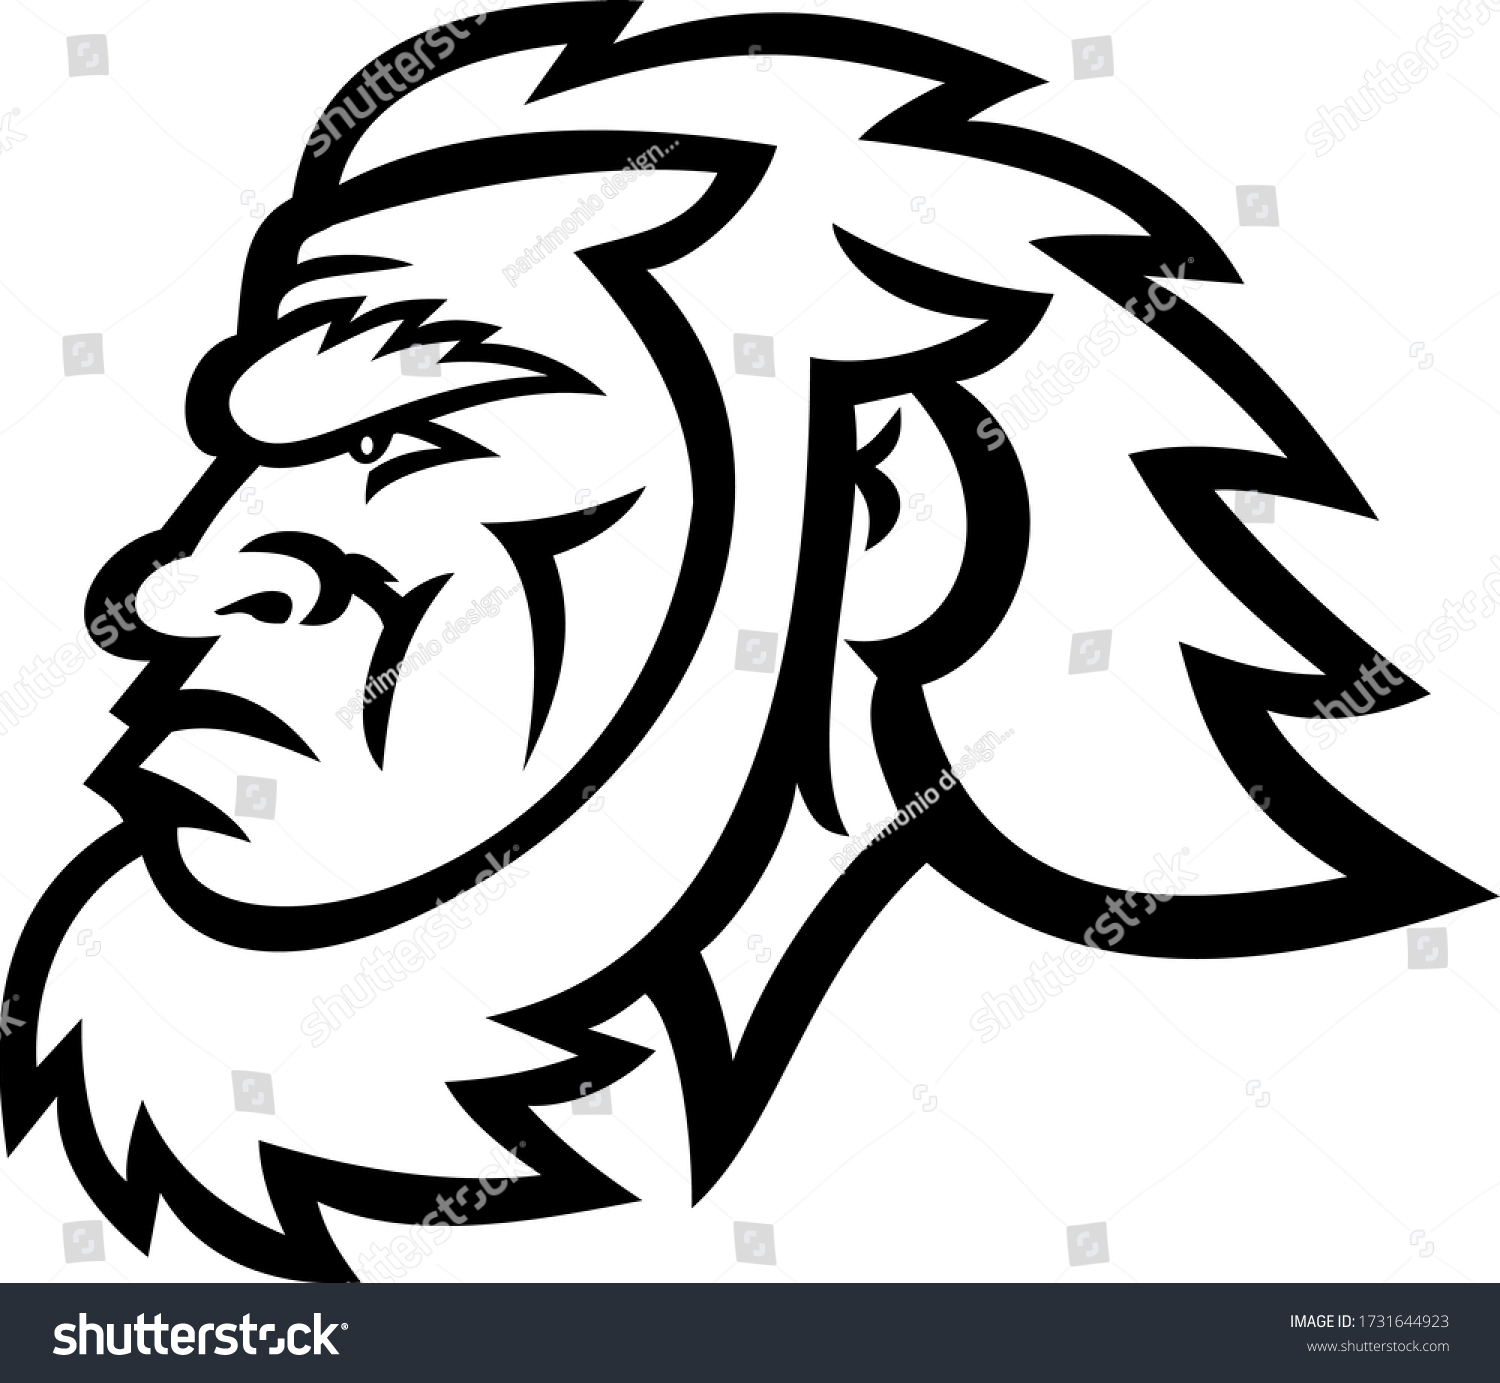 SVG of Mascot icon illustration of head of a primitive caveman, Cro-Magnon or neanderthal, an extinct species of archaic humans viewed from side in Black and White retro style. svg